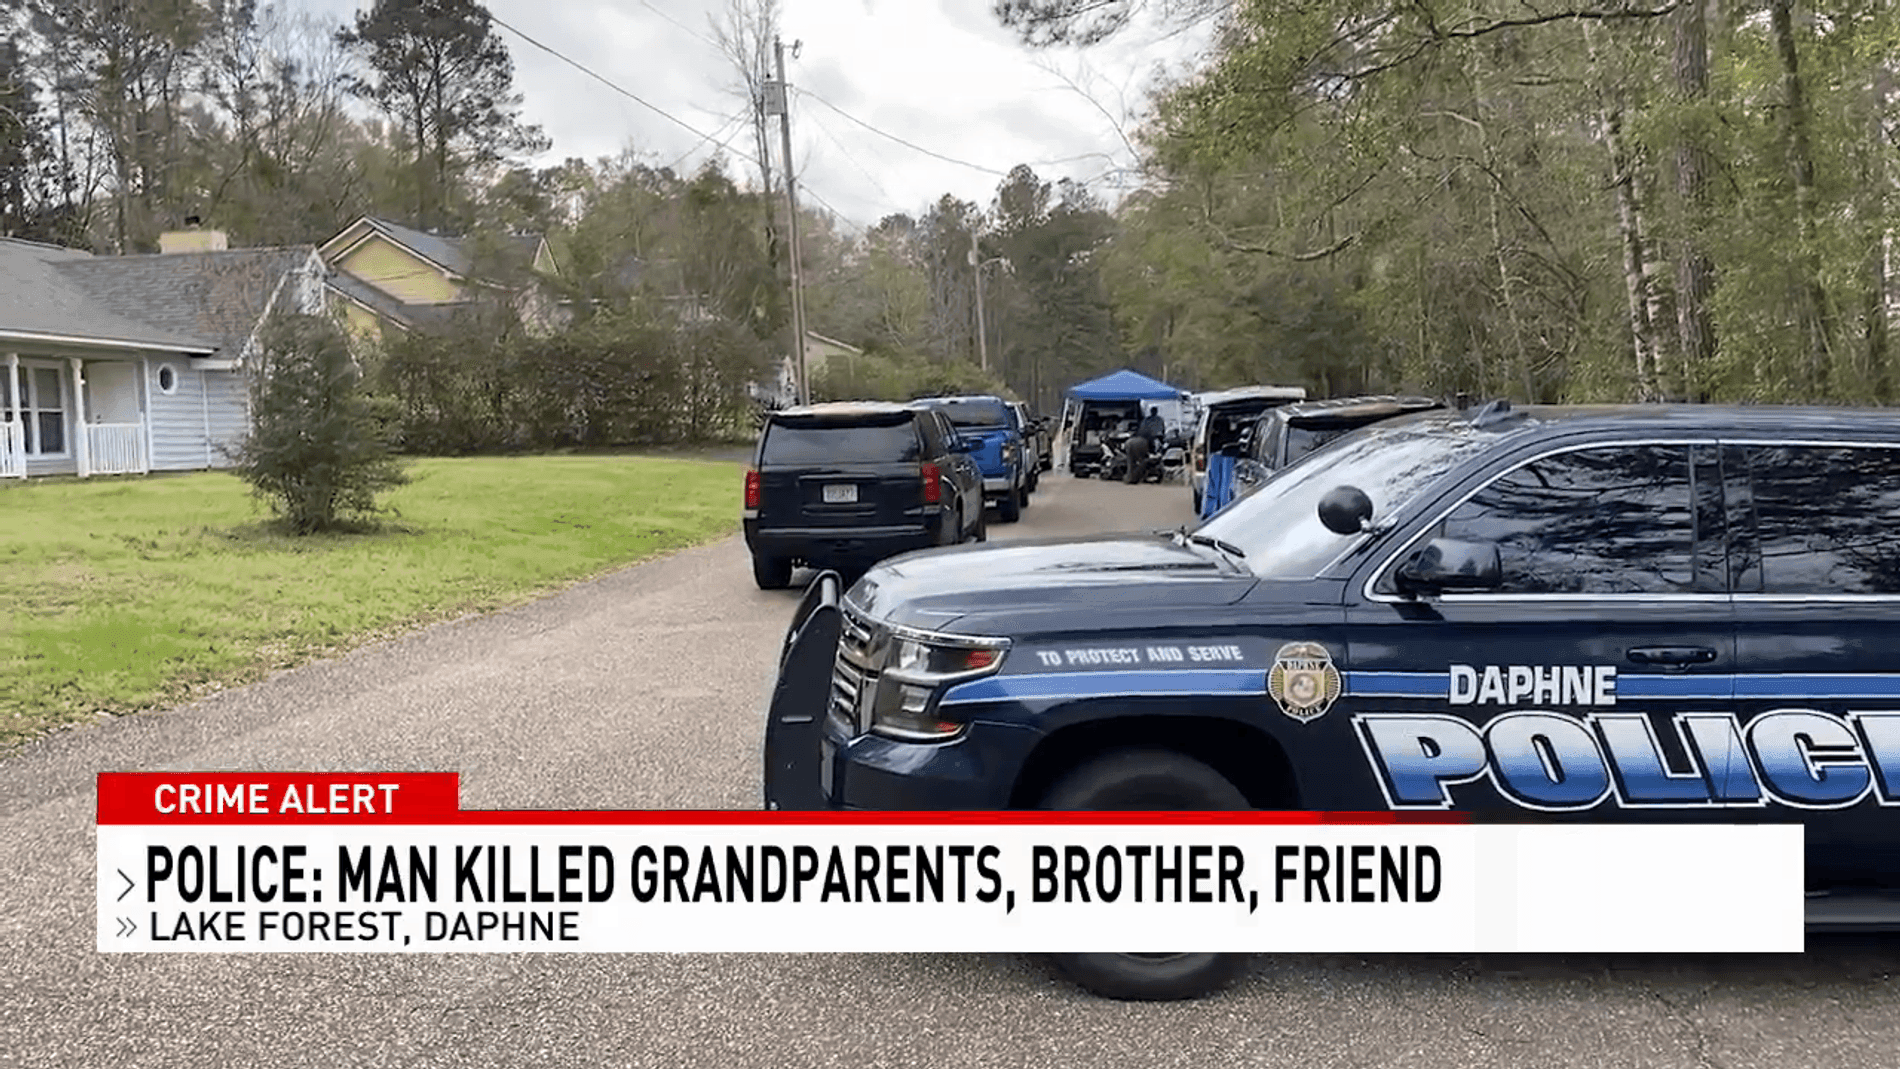 Daphne Police Victims In Quadruple Murder Beaten With Pickaxe Three